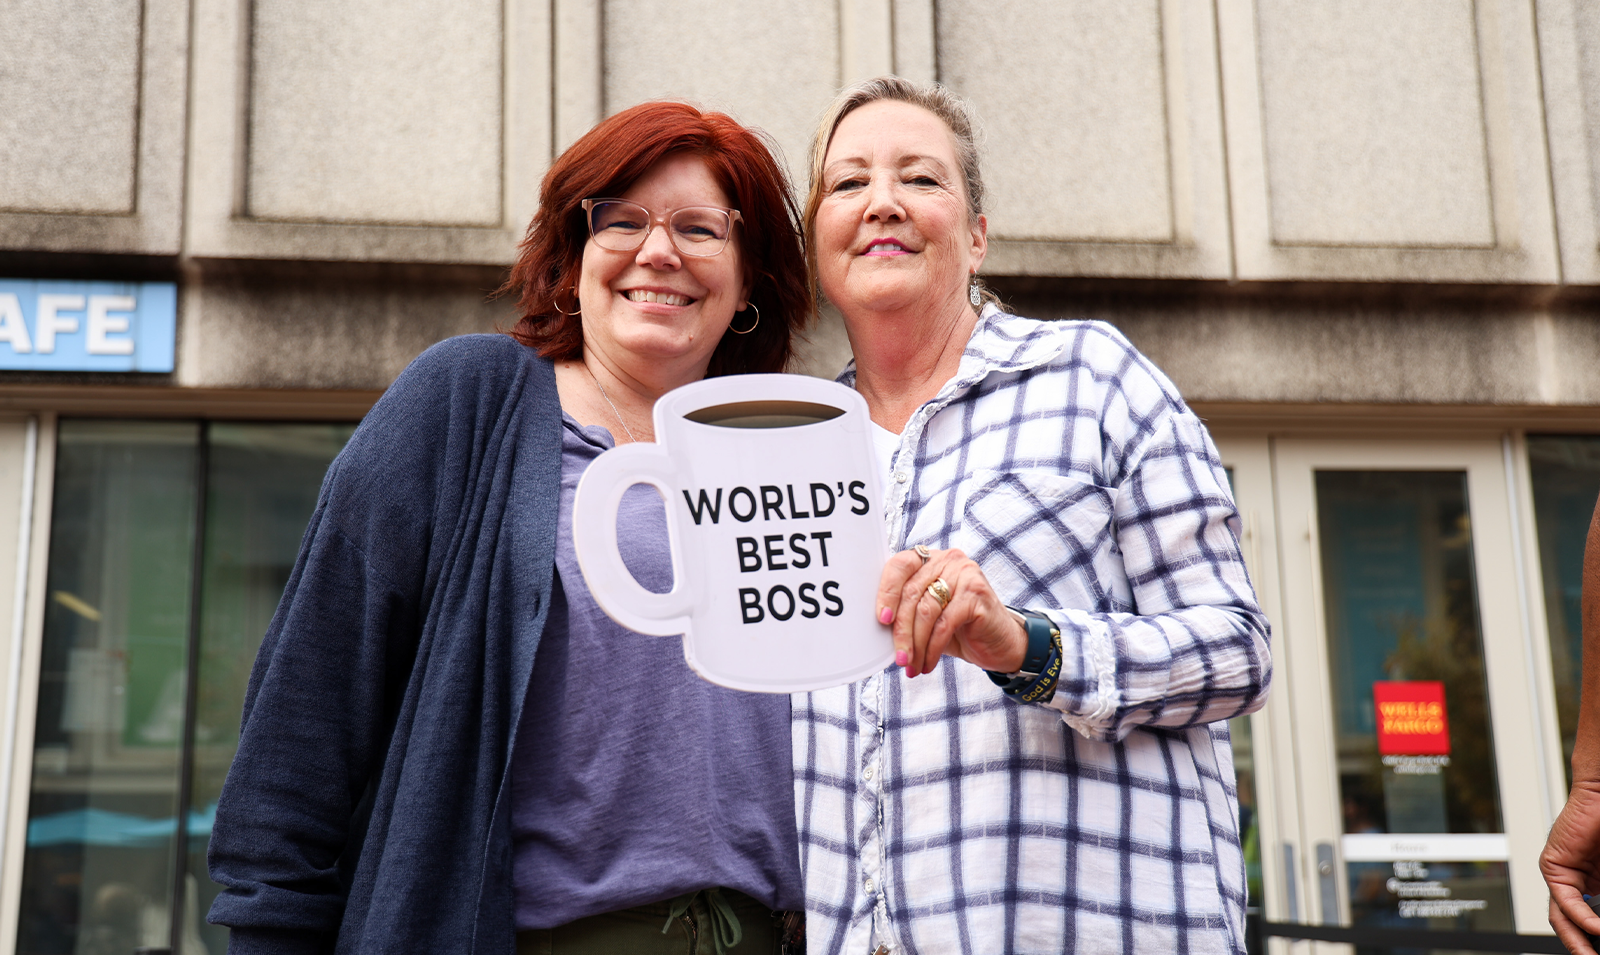 Two women posing for a photo. One is holding a large cutout of a coffee cup with text reading 